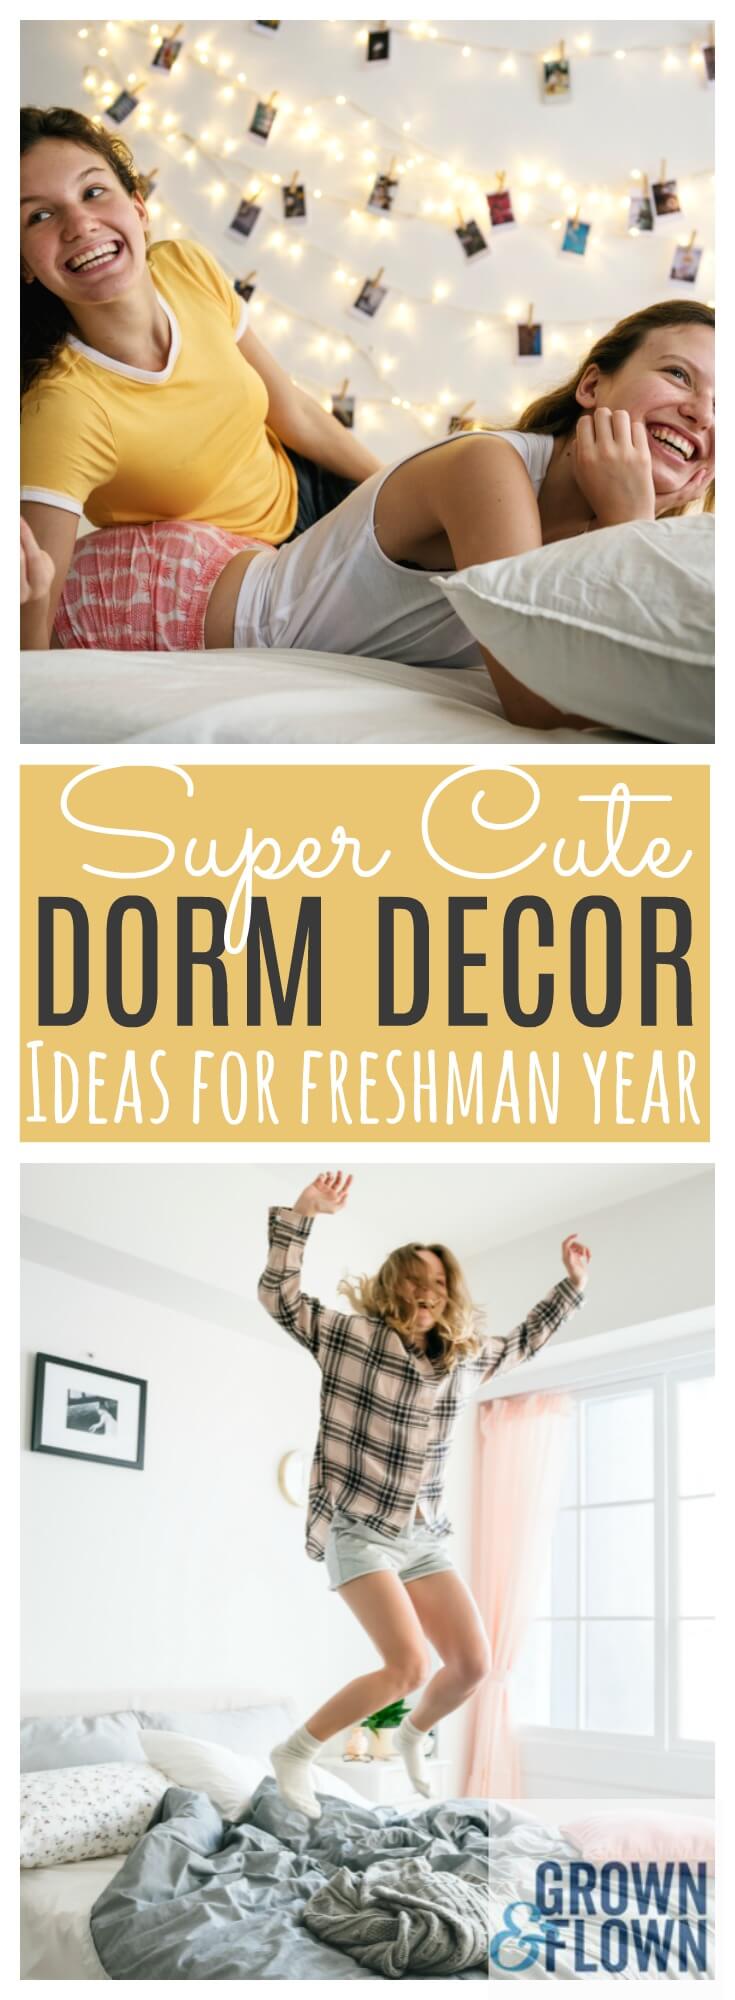 The cutest dorm ideas are right here. Your college freshman will love hanging out in his or her dorm room with these fun organization and decor ideas for her first college dorm. #freshmanyear #college #collegedorm #dormideas #dormdecor #Diydorm #collegelife #dormroom #dormorganization #organizationideas